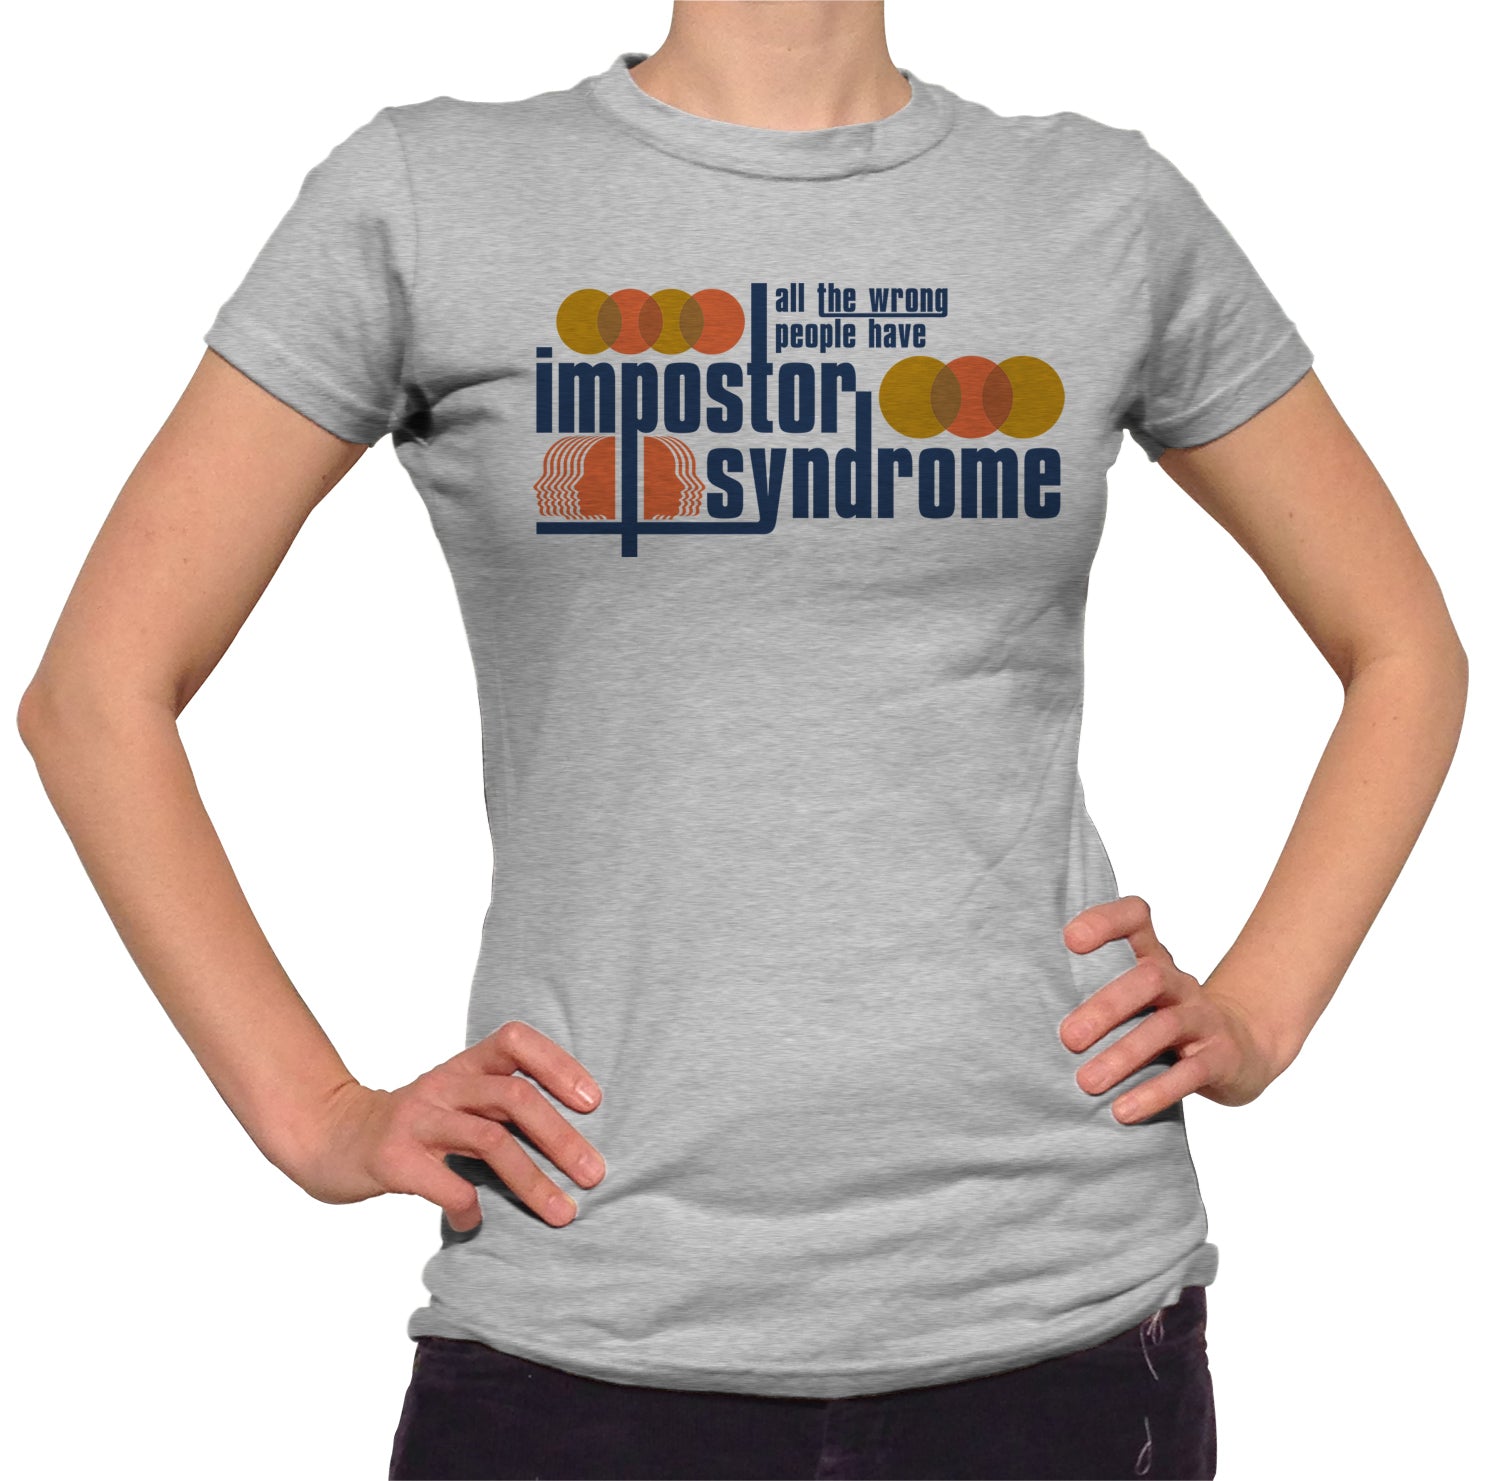 Women's All The Wrong People Have Impostor Syndrome T-Shirt